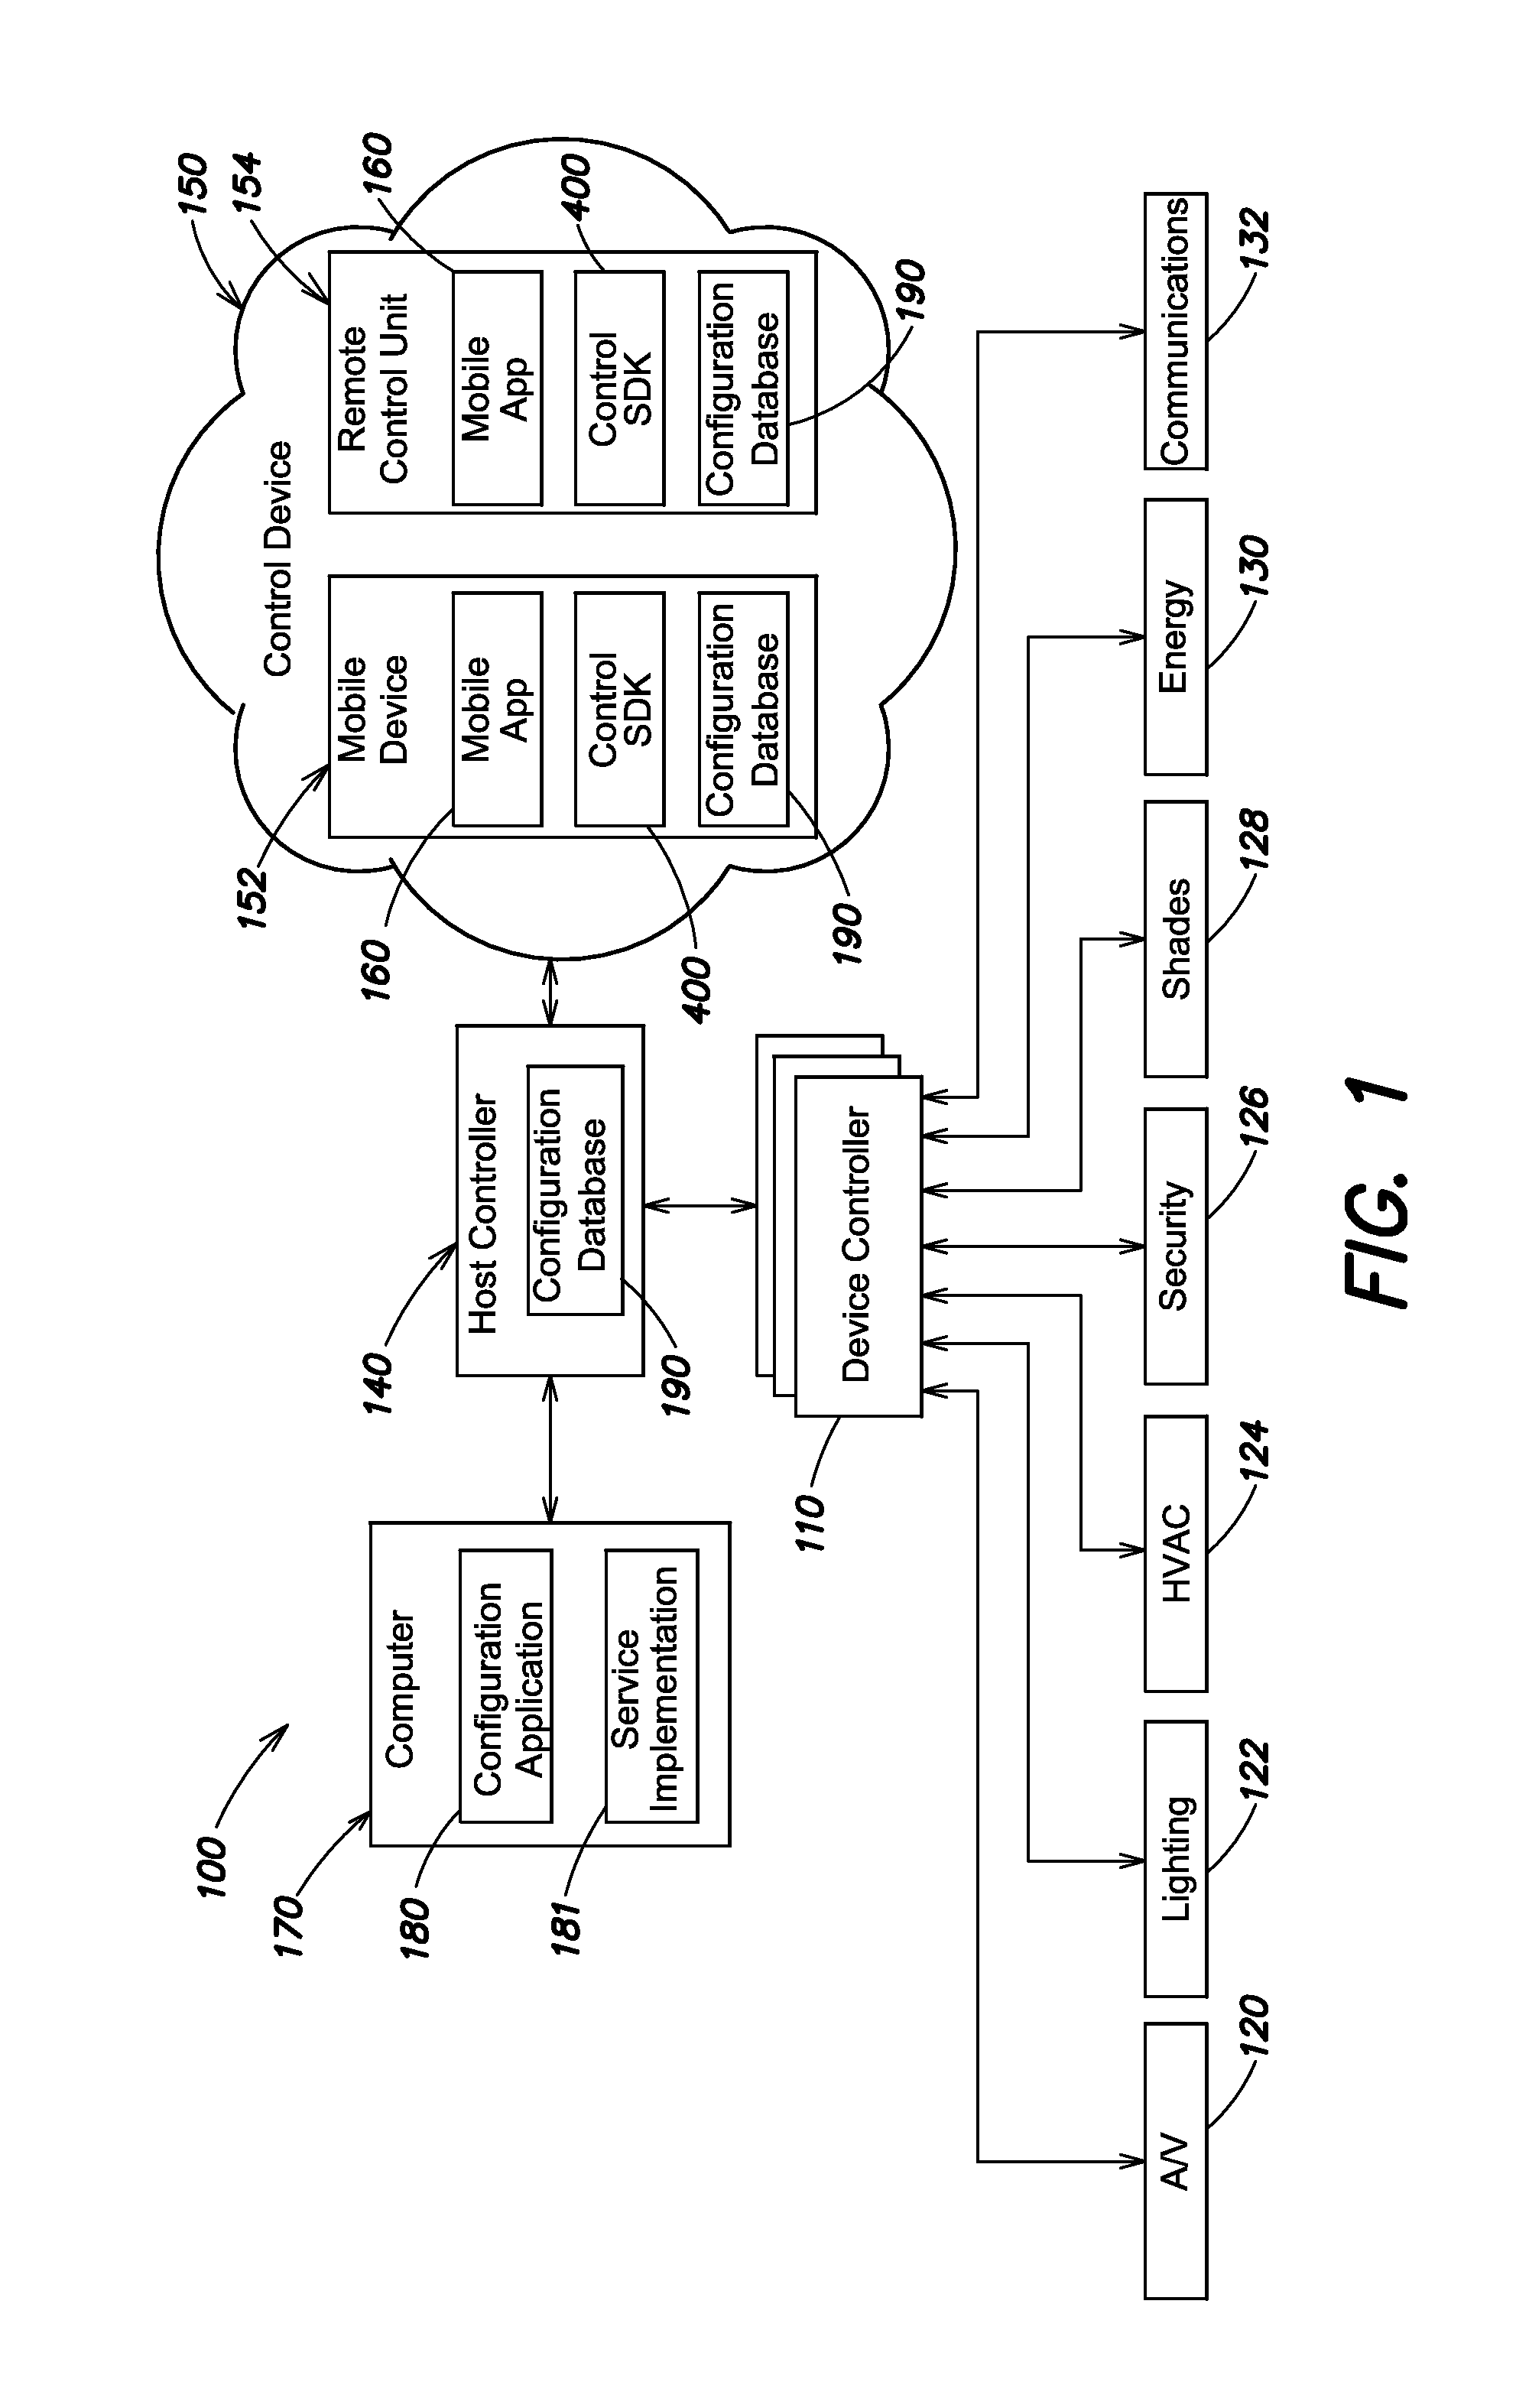 Providing a user interface for devices of a home automation system